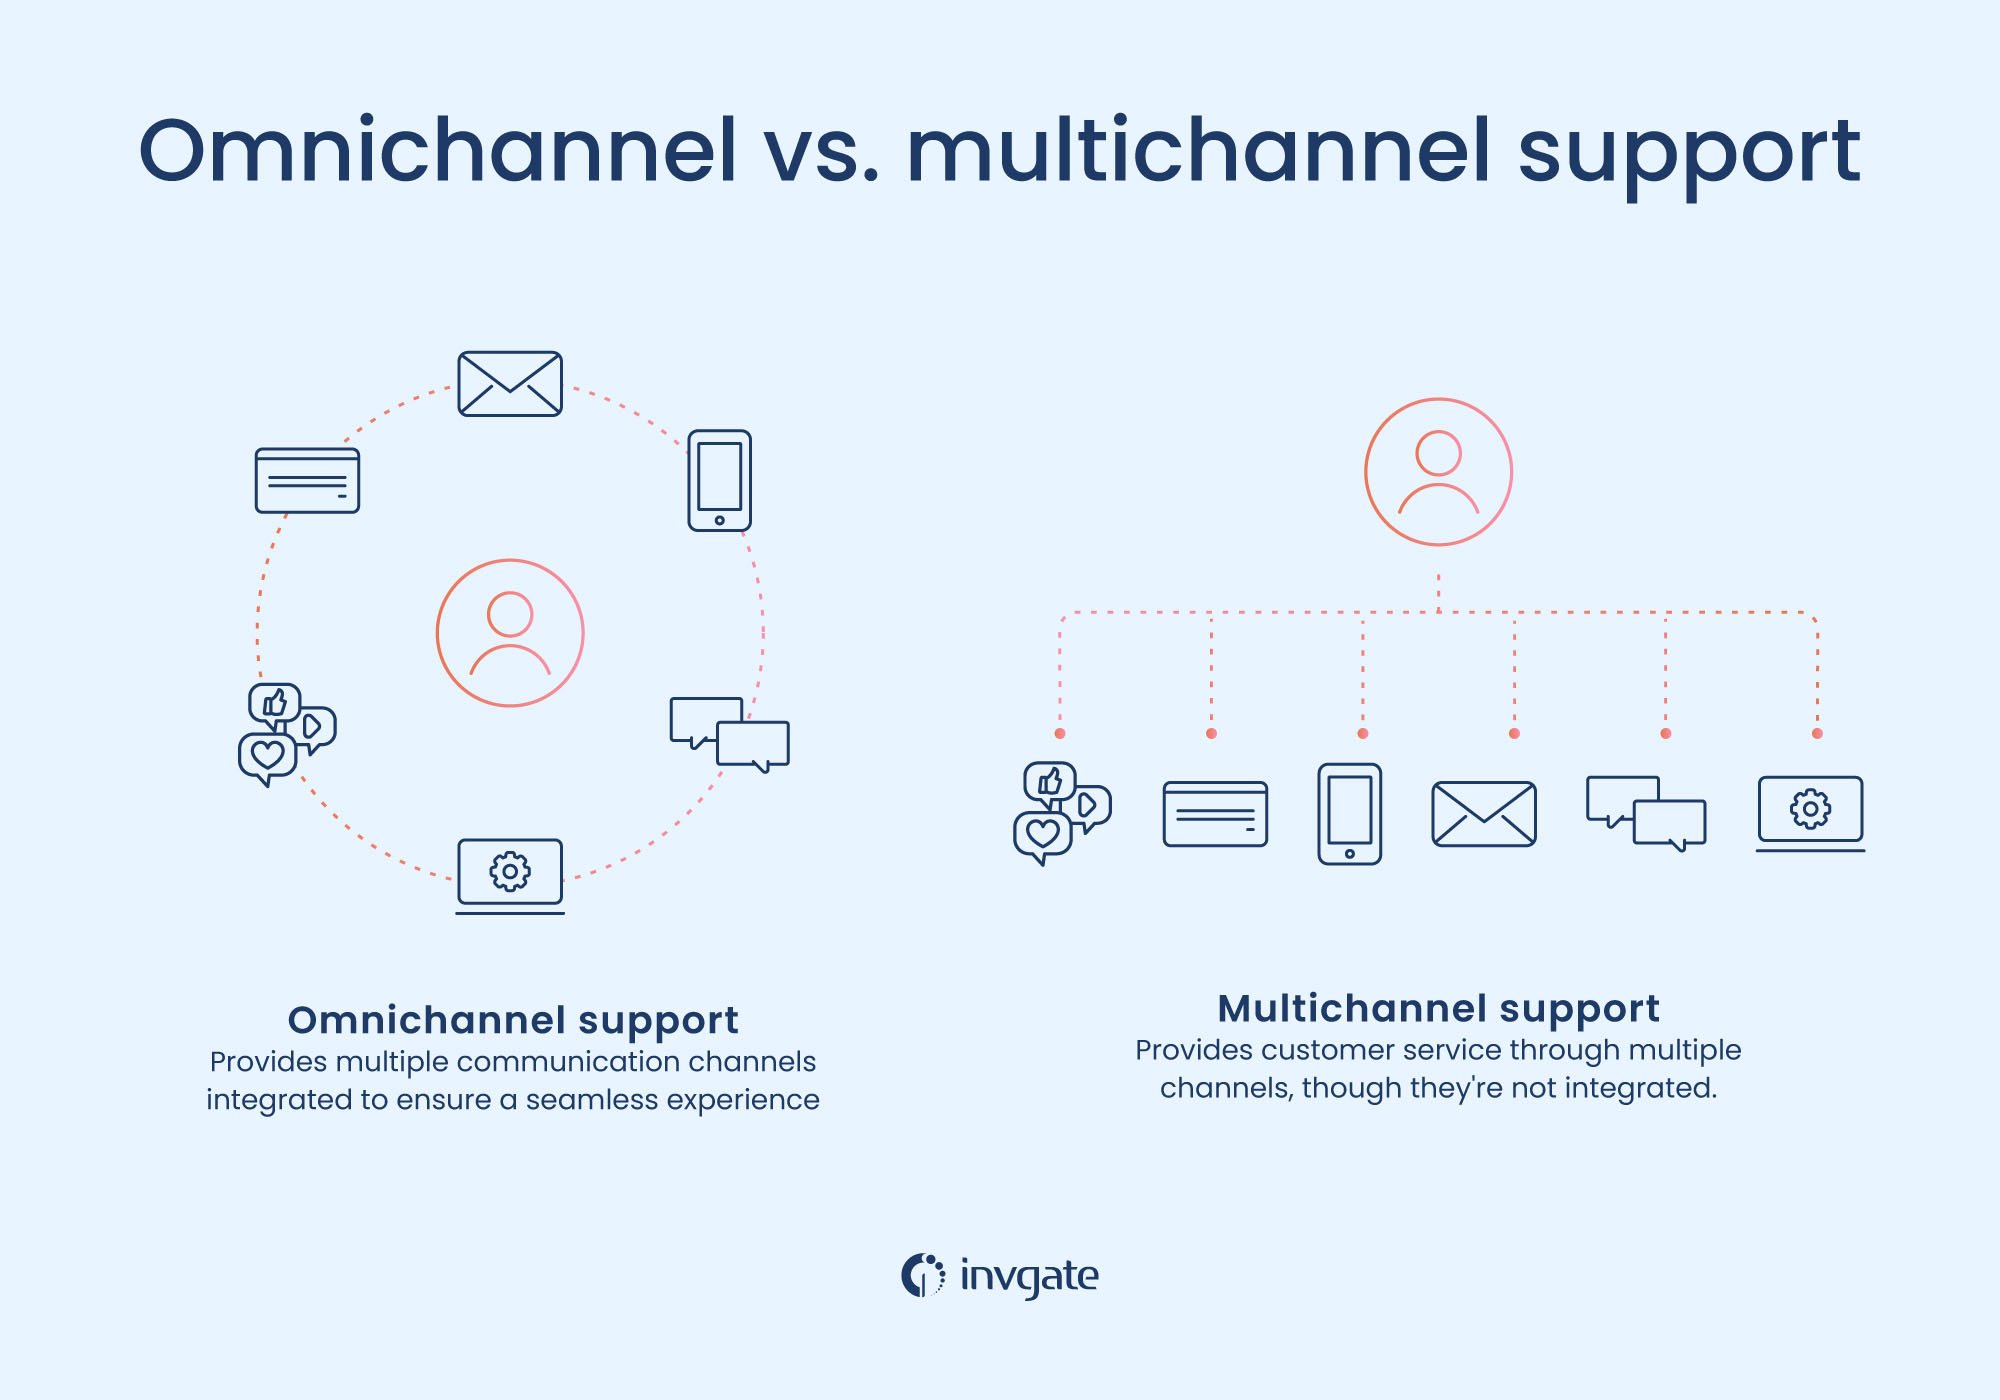 Comparative chart with the differences between omnichannel and multichannel support.